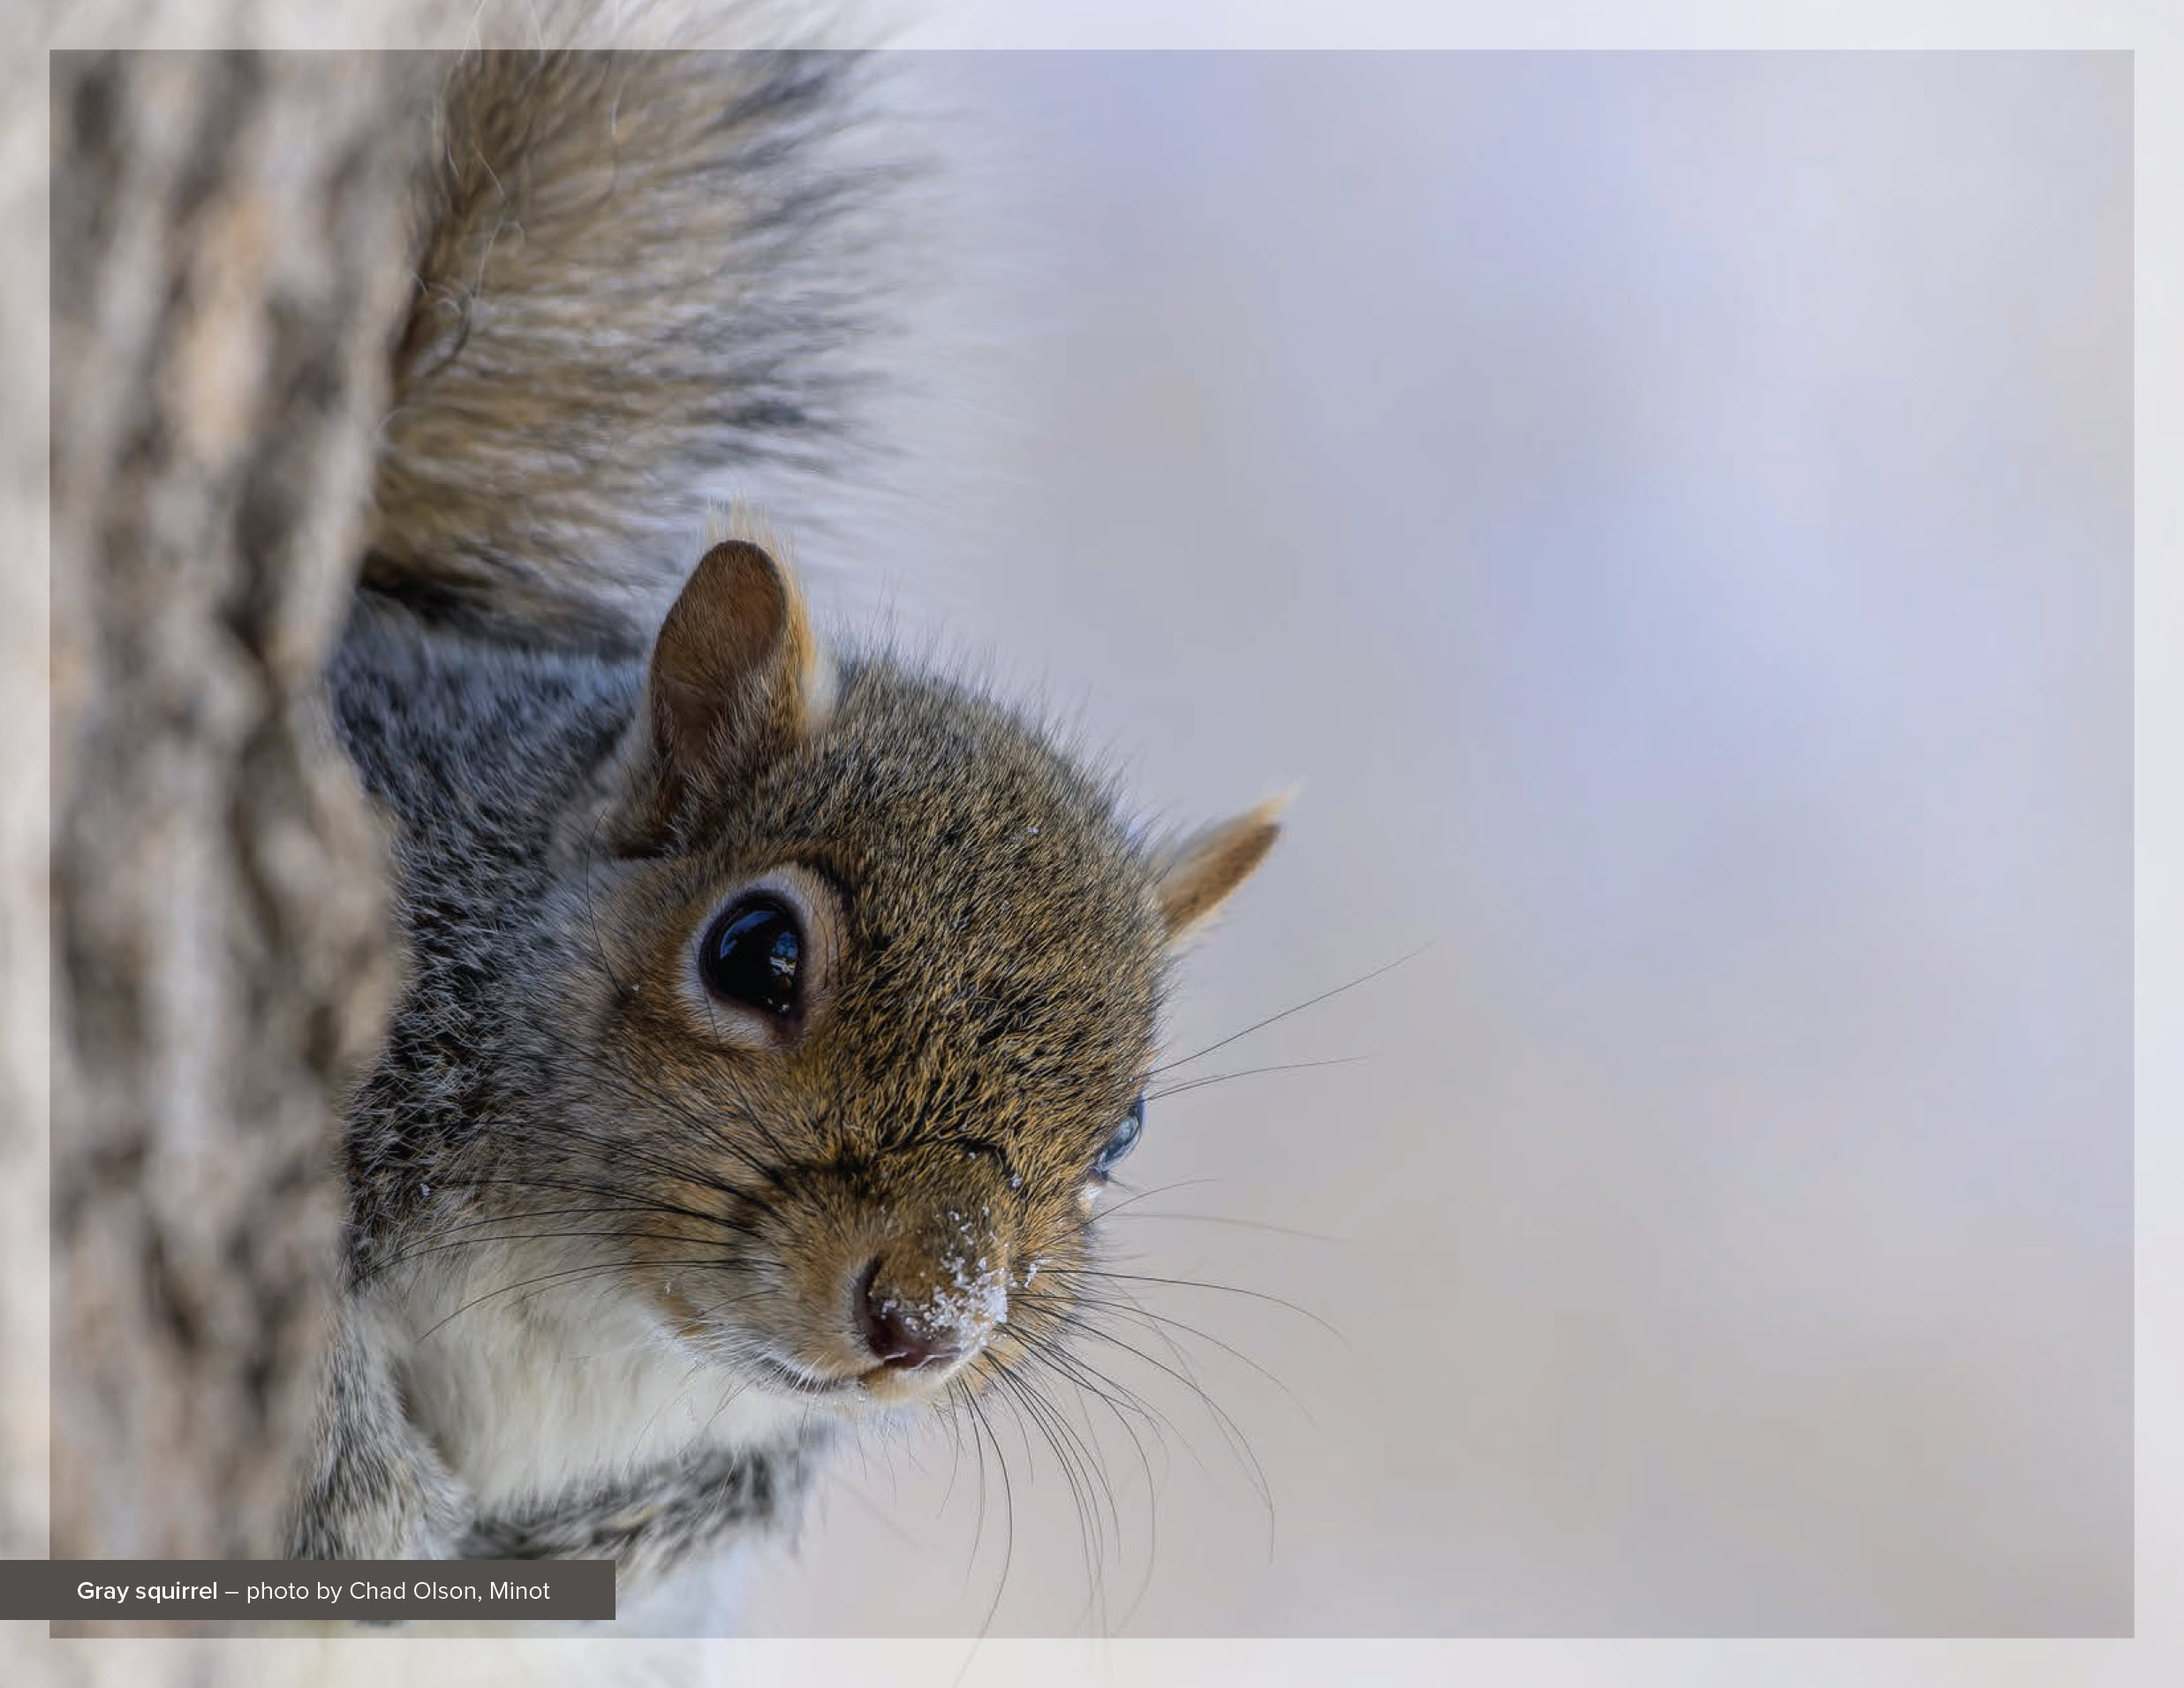 Gray squirrel – photo by Chad Olson, Minot